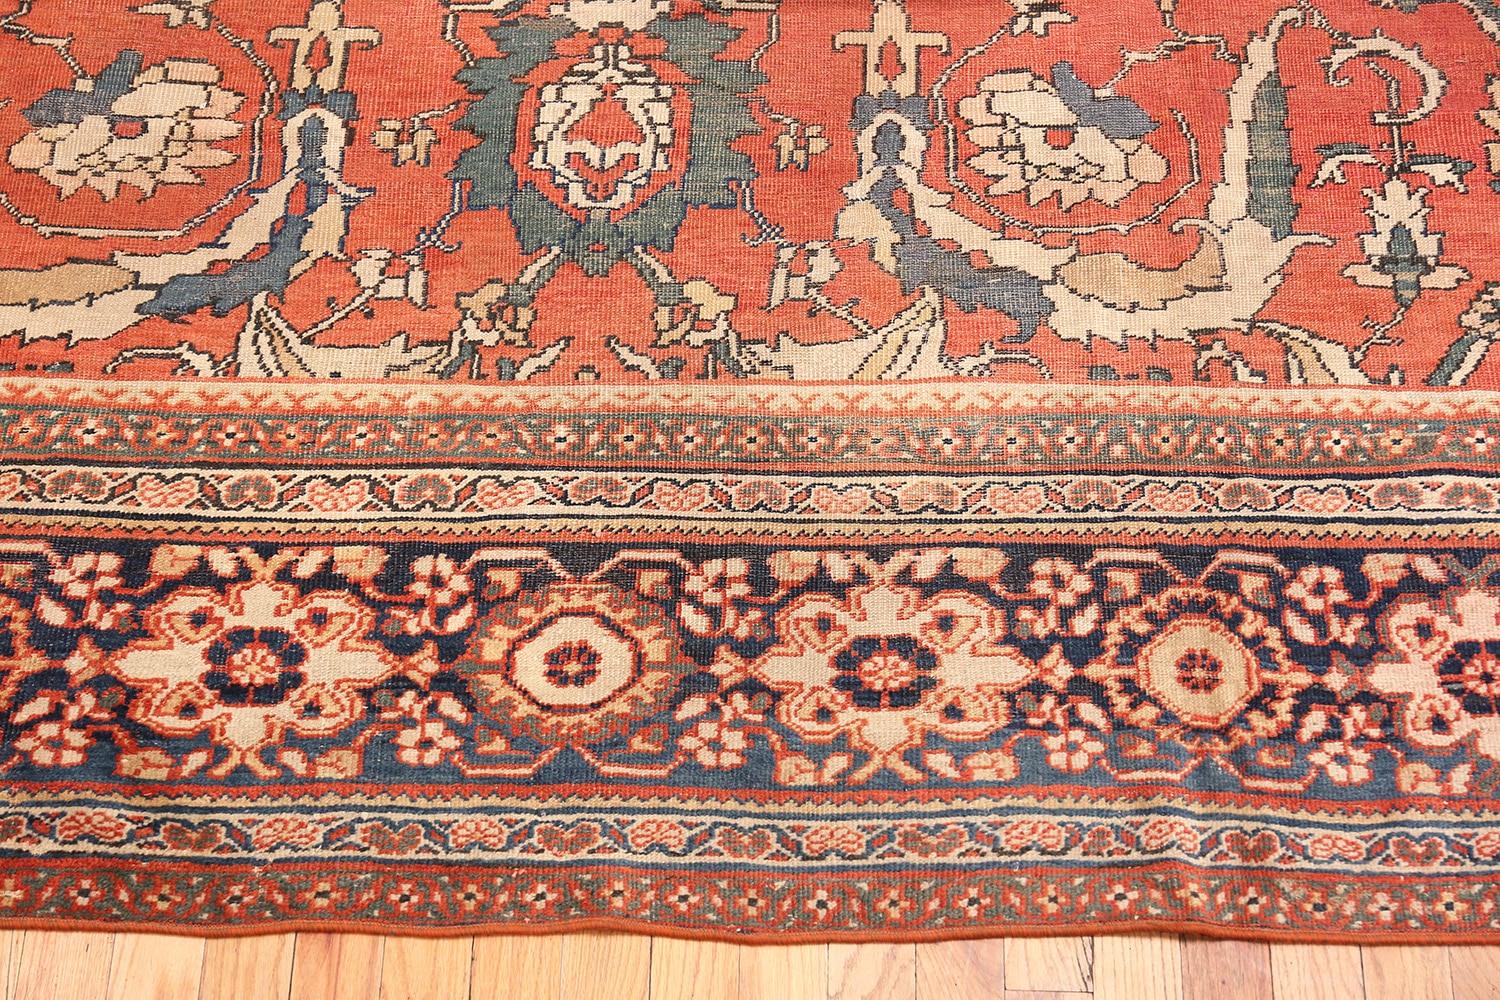 Antique Sultanabad Persian Rug. Size: 11' 10